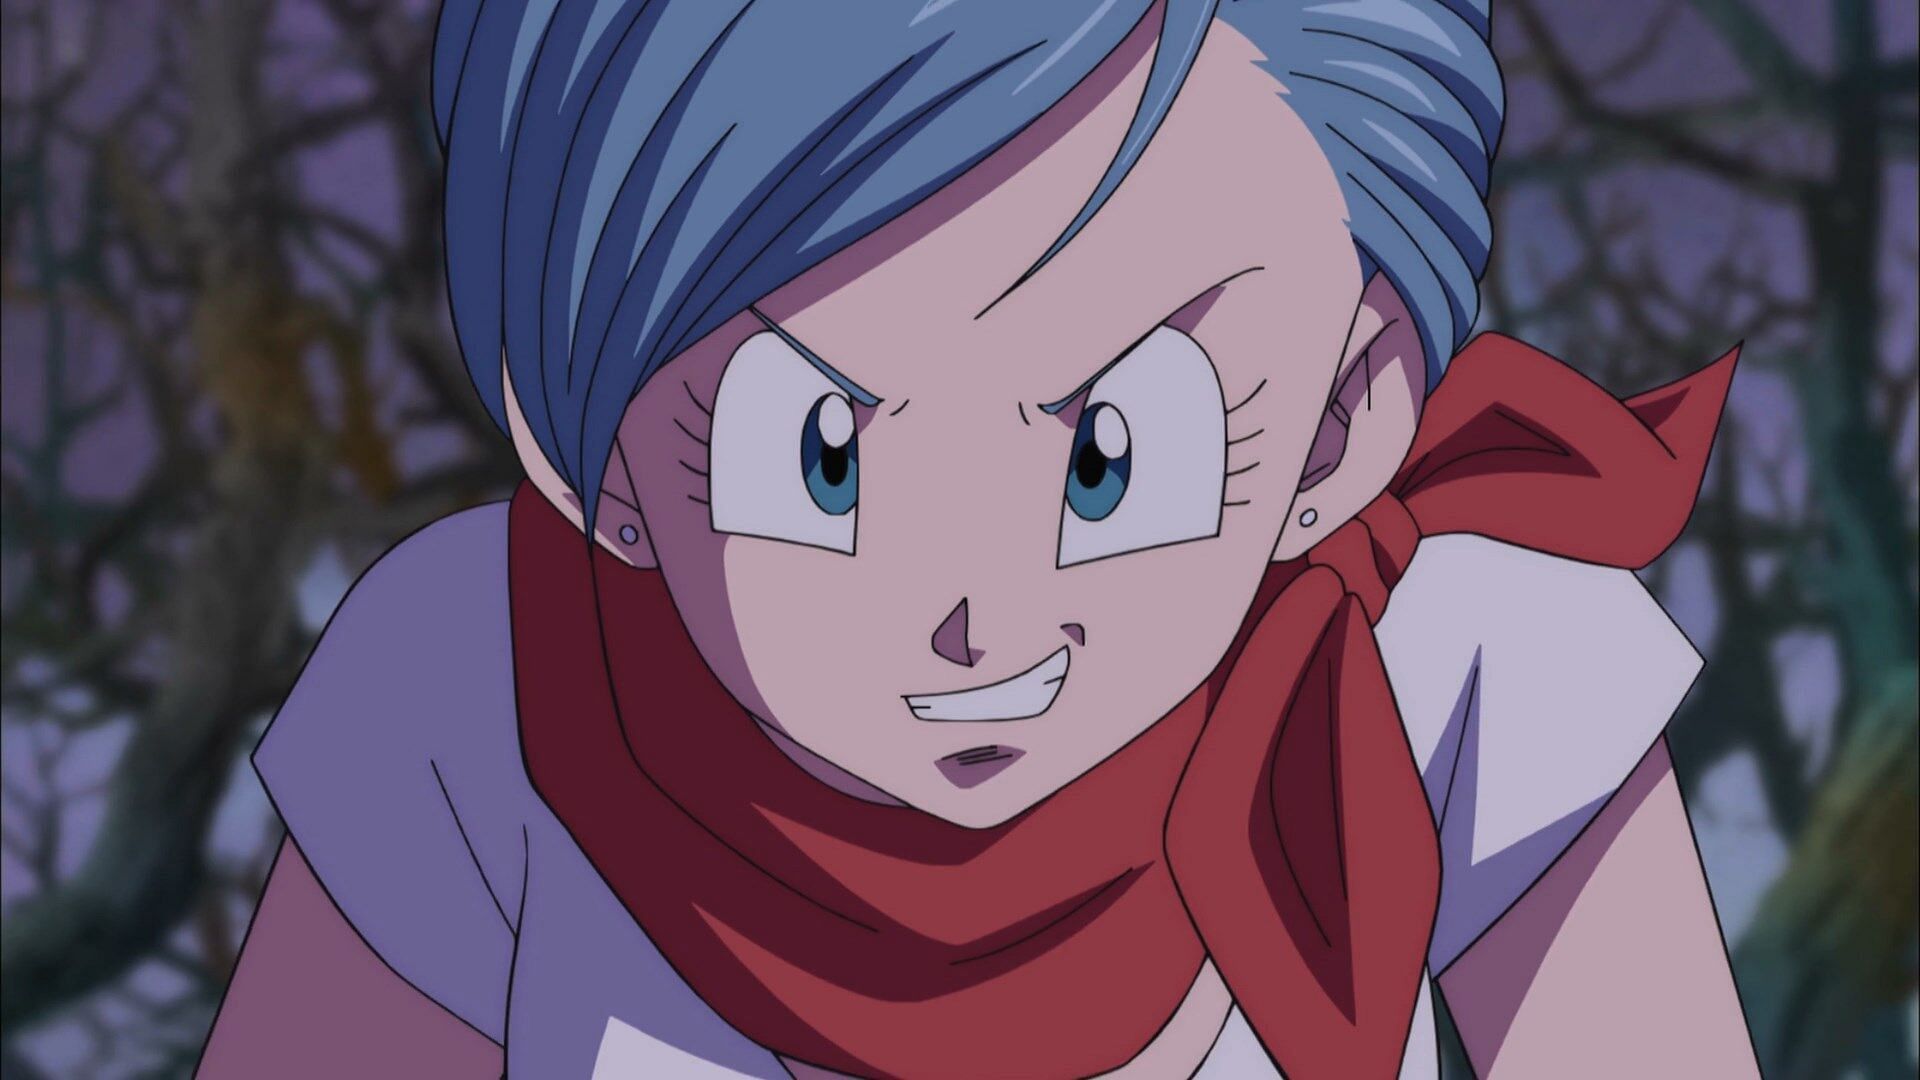 Bulma Briefs is one of the franchise